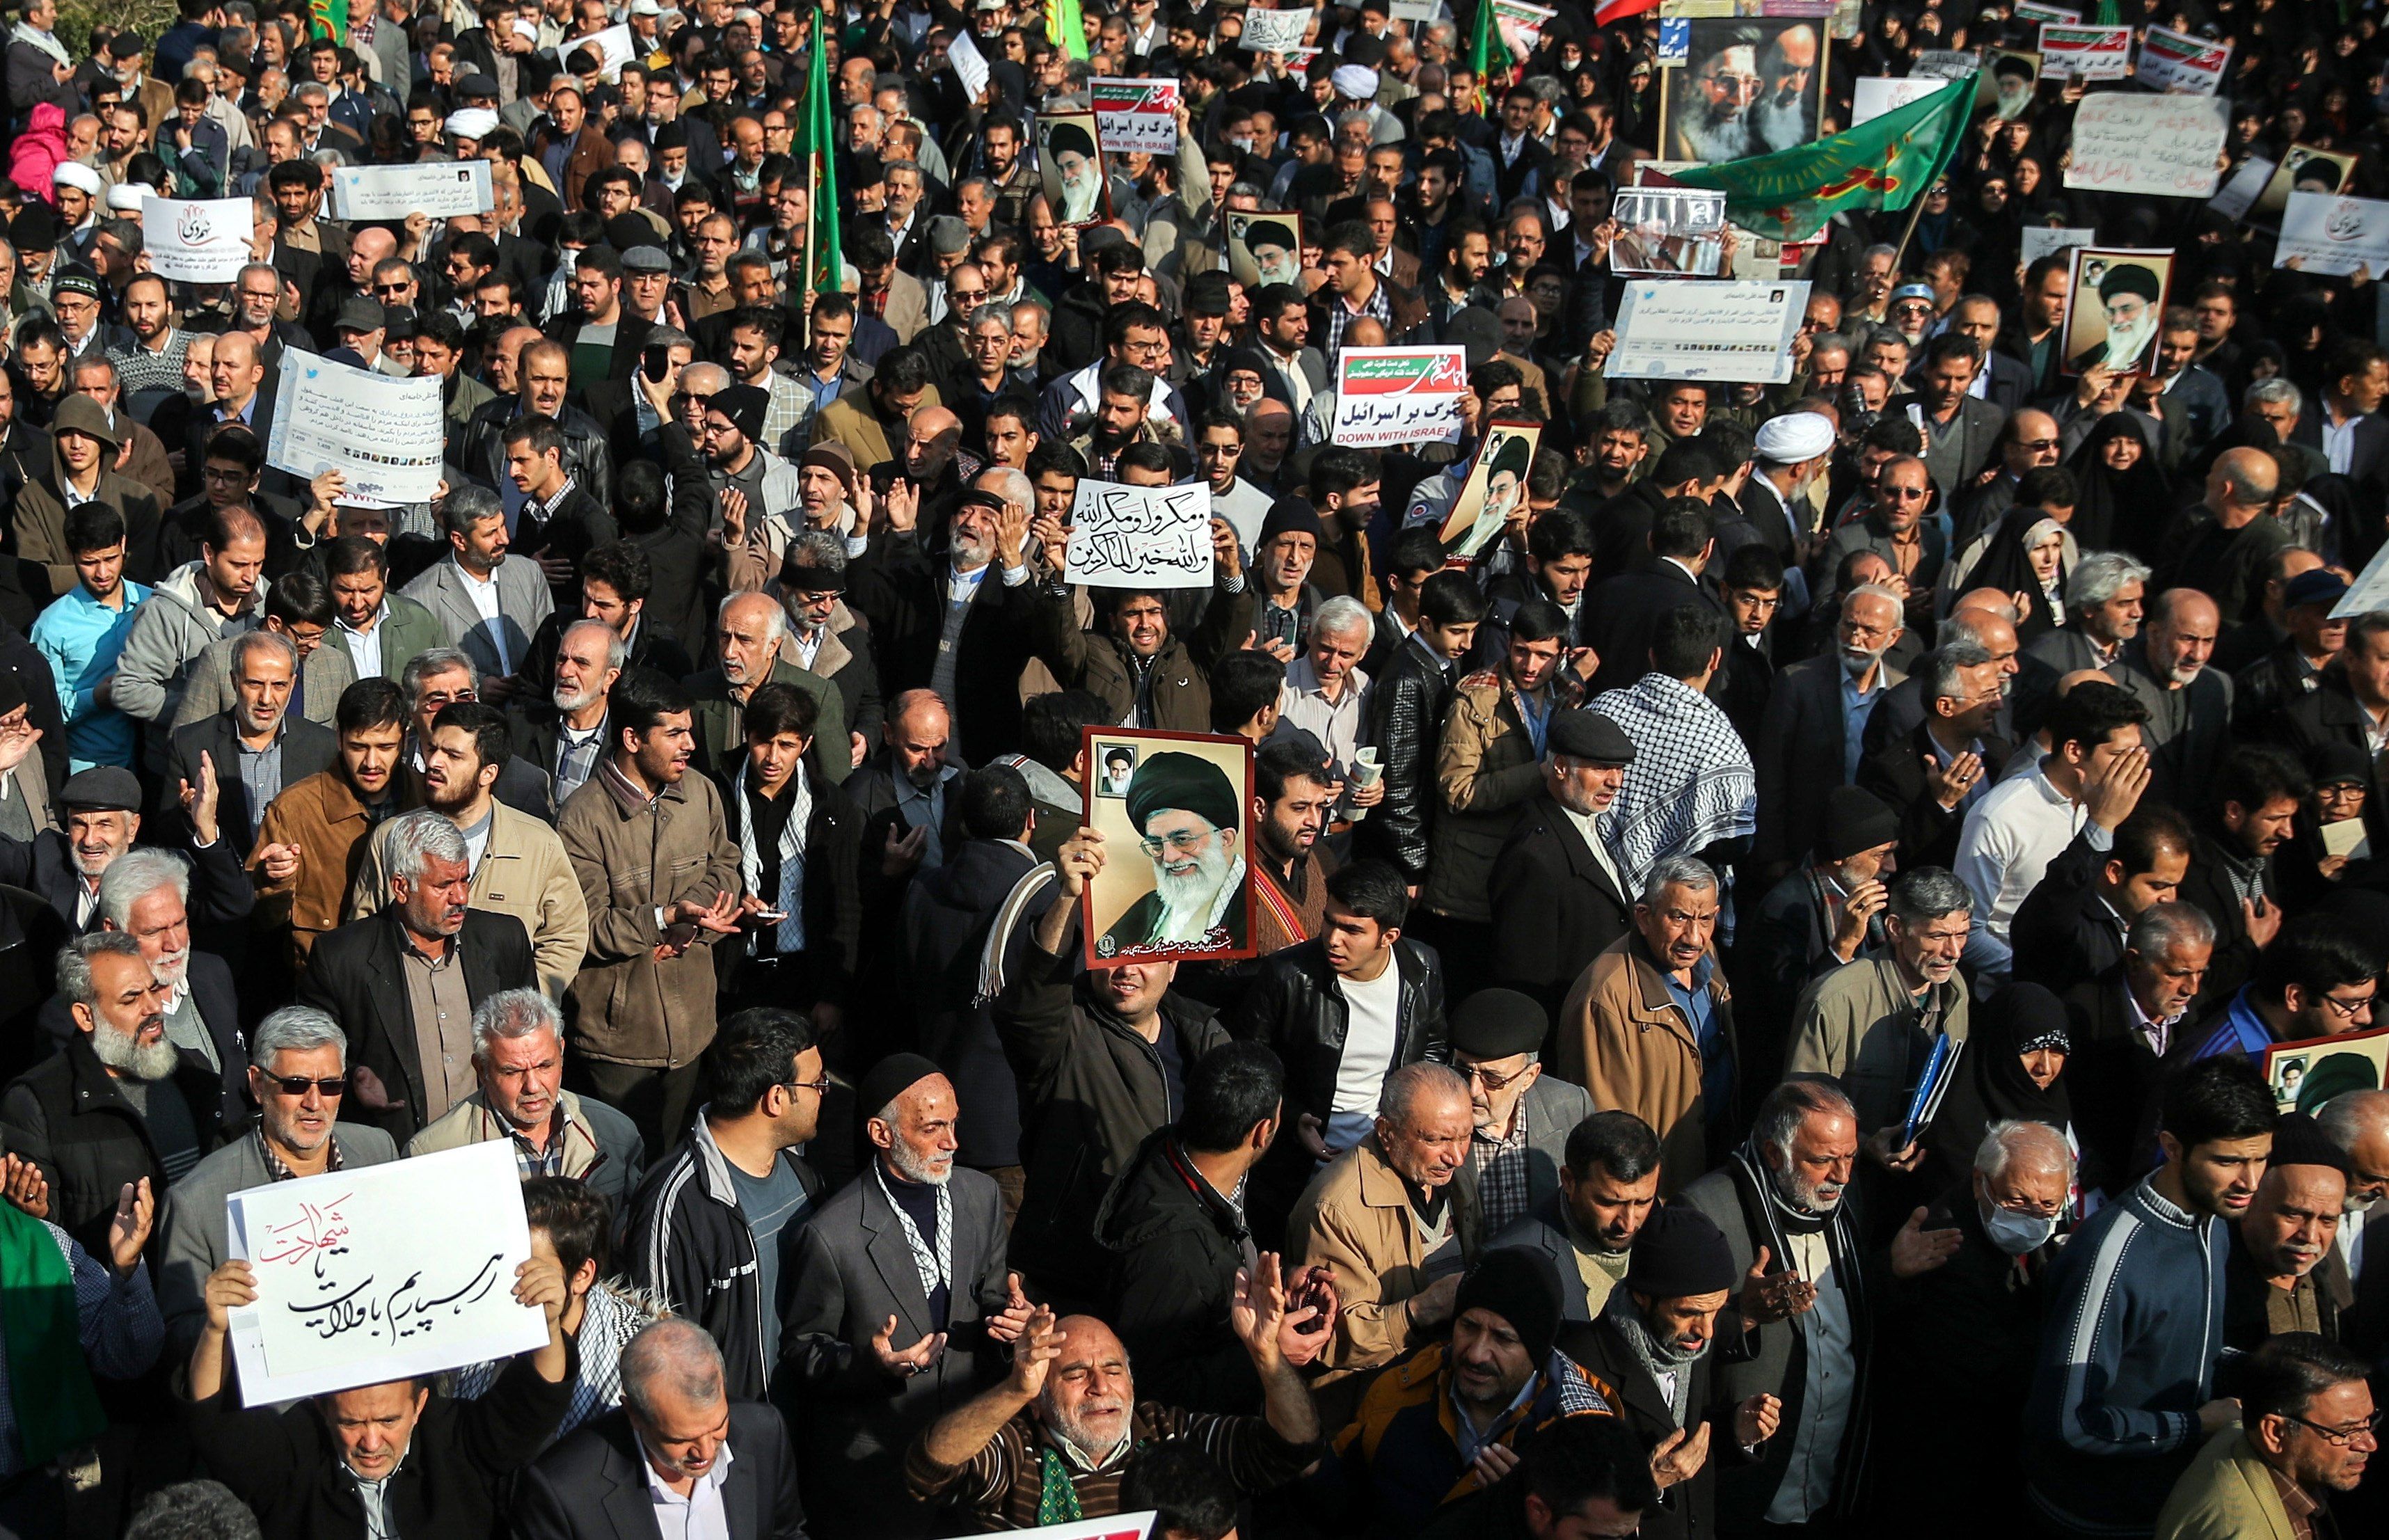 What to make of Iran’s demonstrations